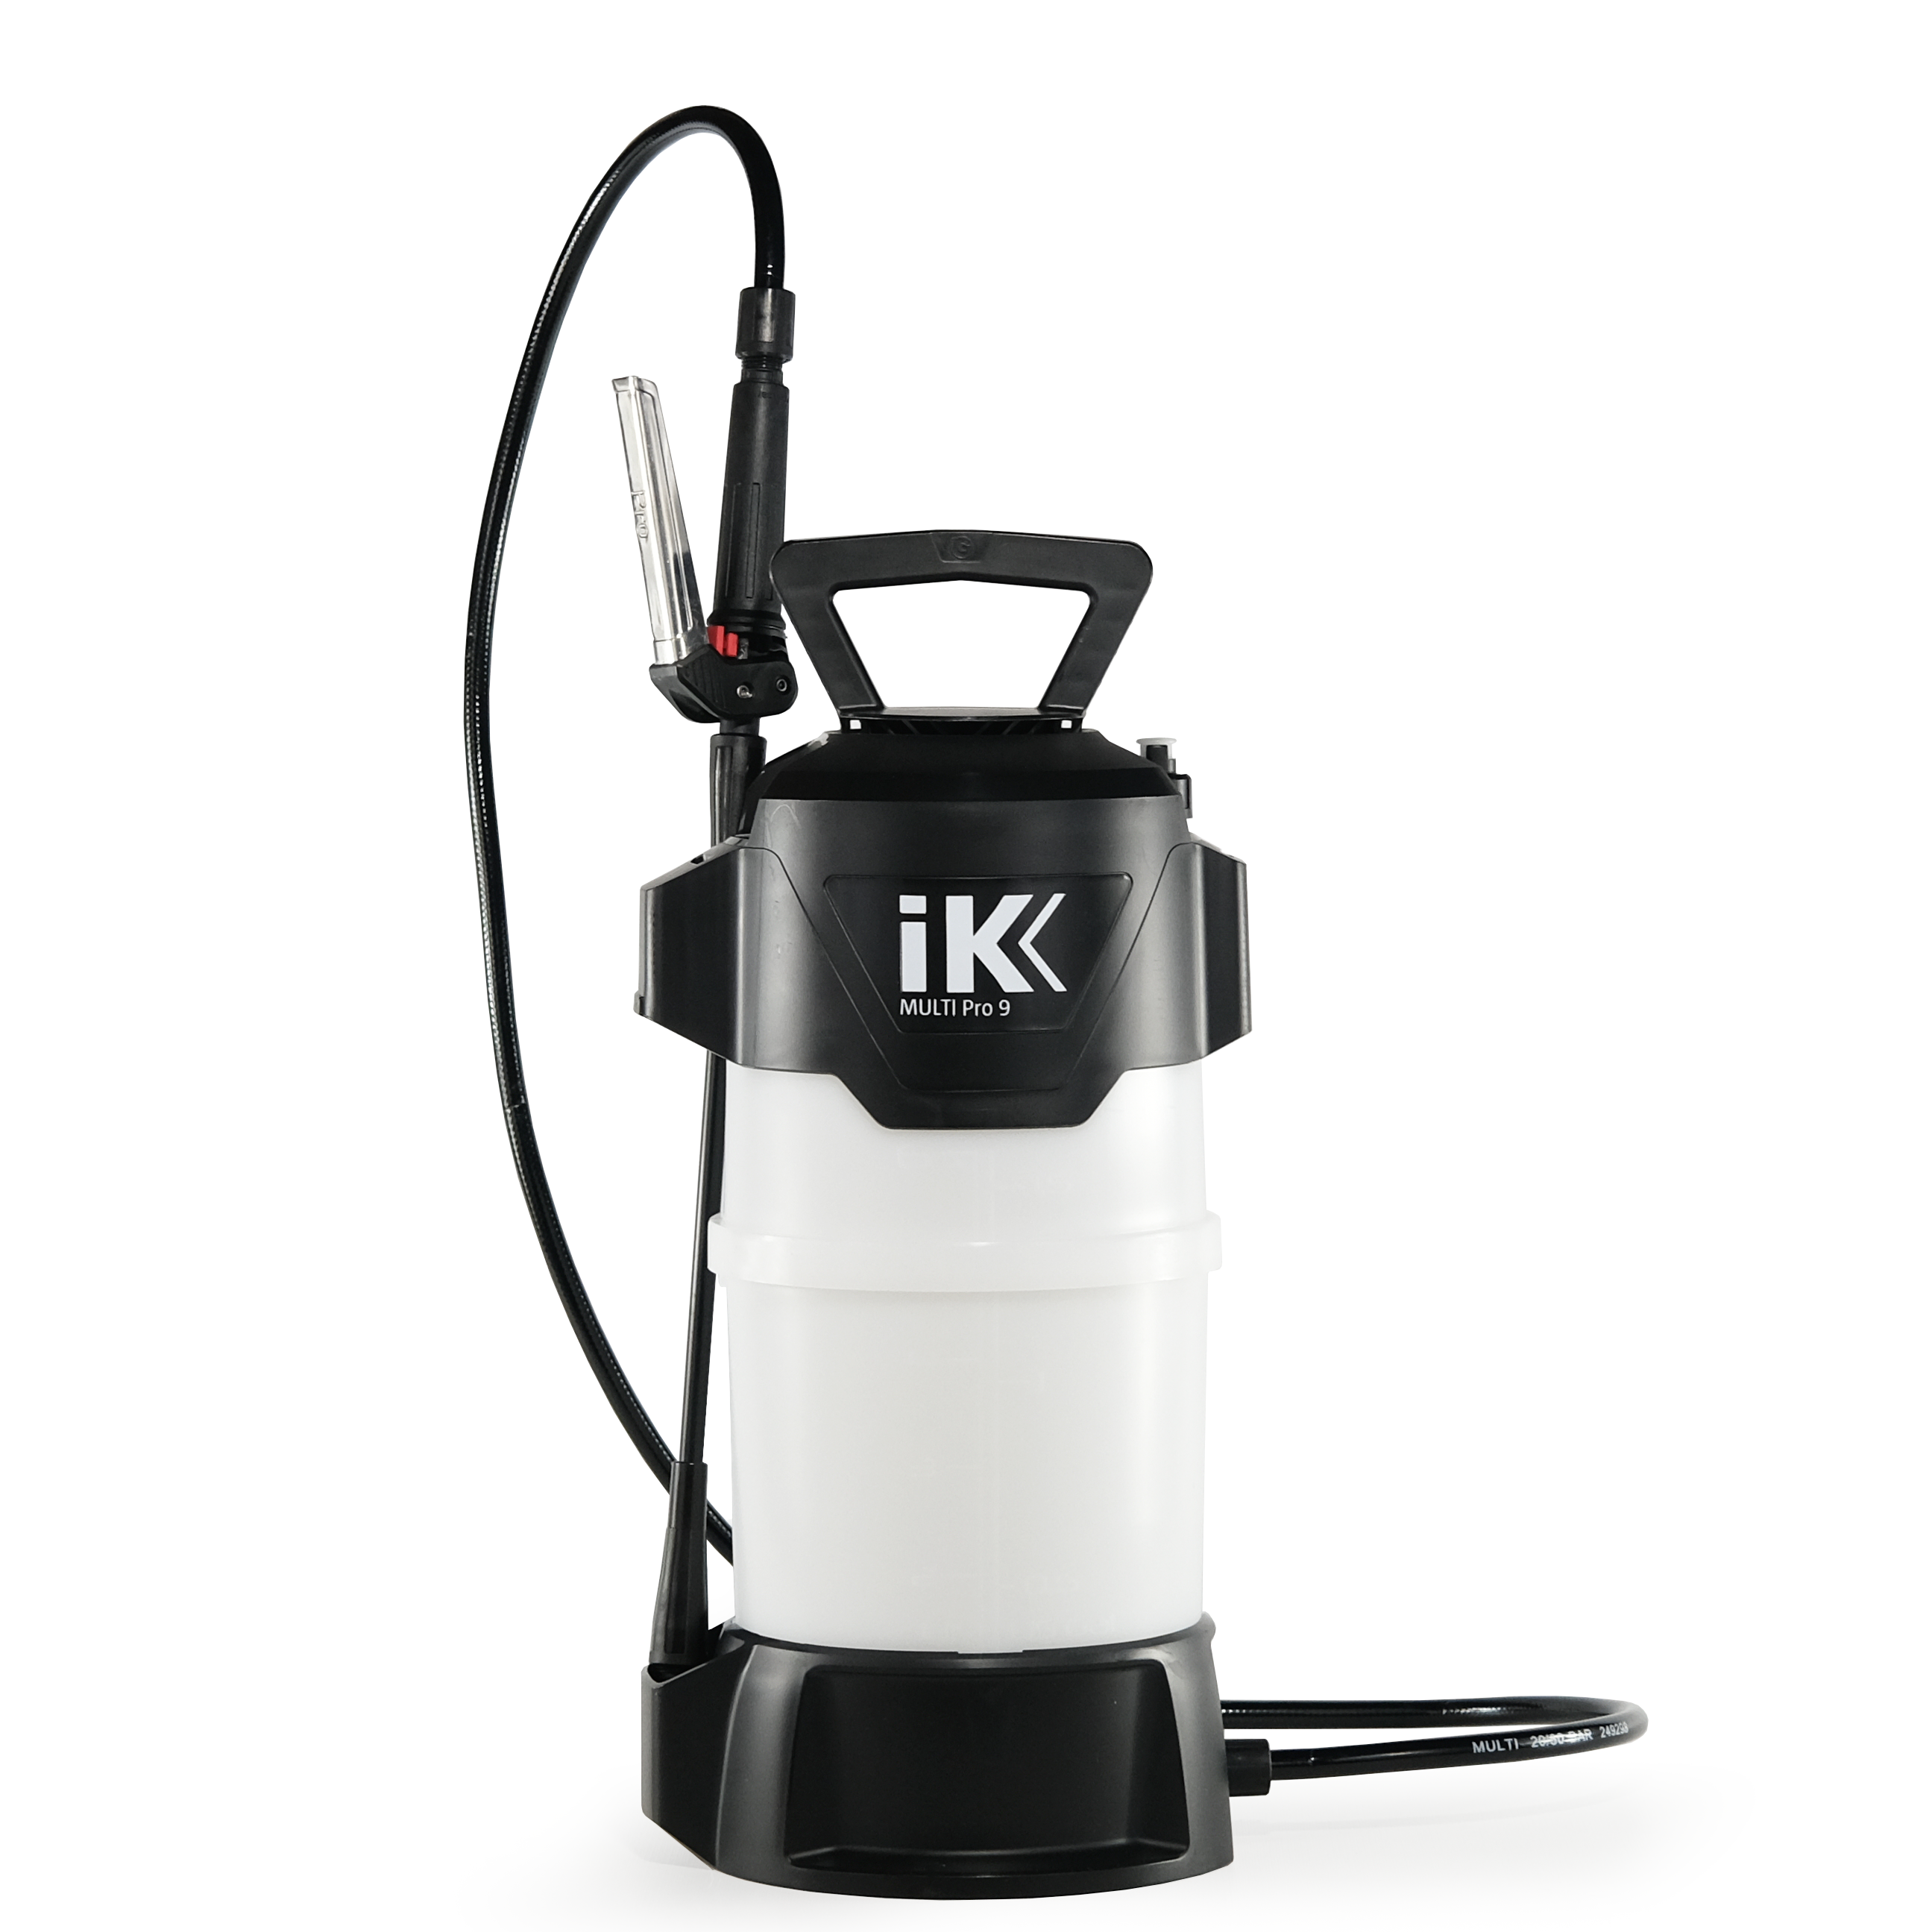 GOING PRO 2: All About the New iK Pro 2 Foam & Multi Sprayers